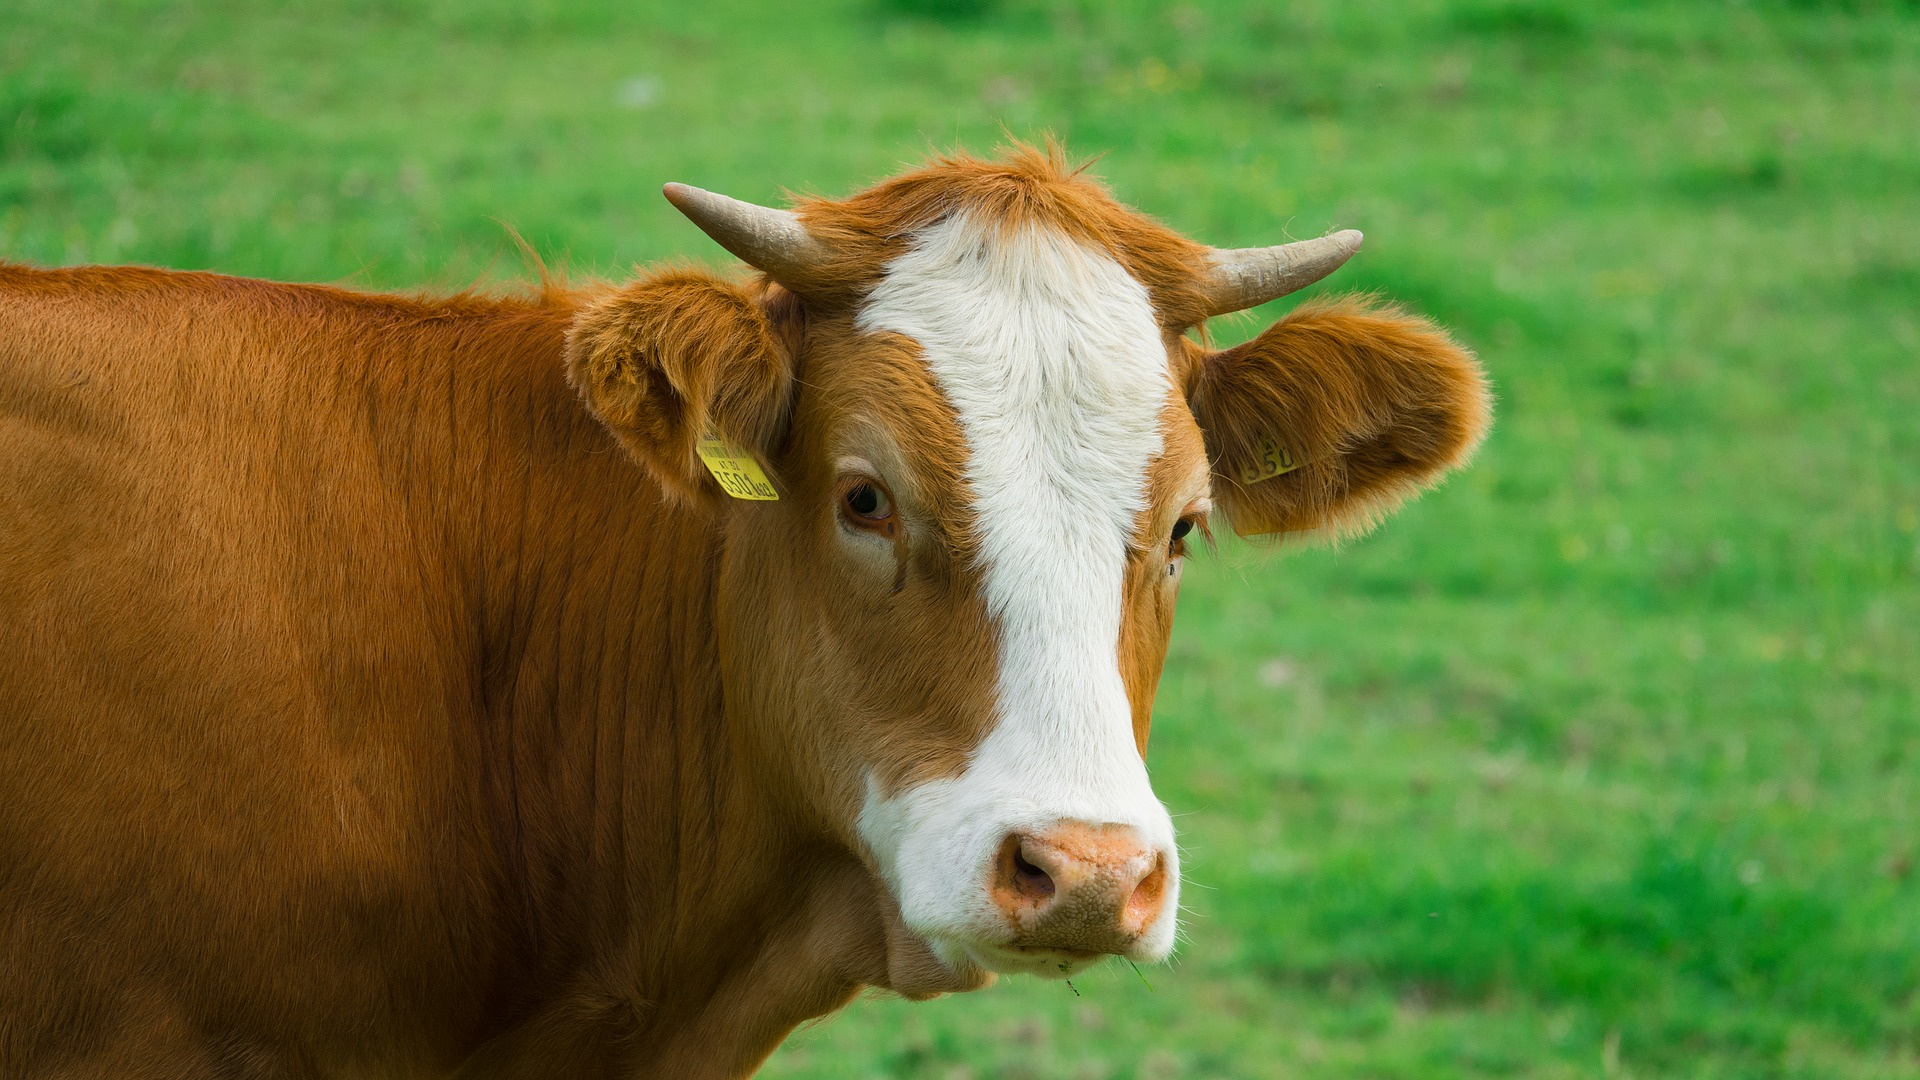 Brown and White Cow on Green Grass Field During Daytime. Wallpaper in 1920x1080 Resolution